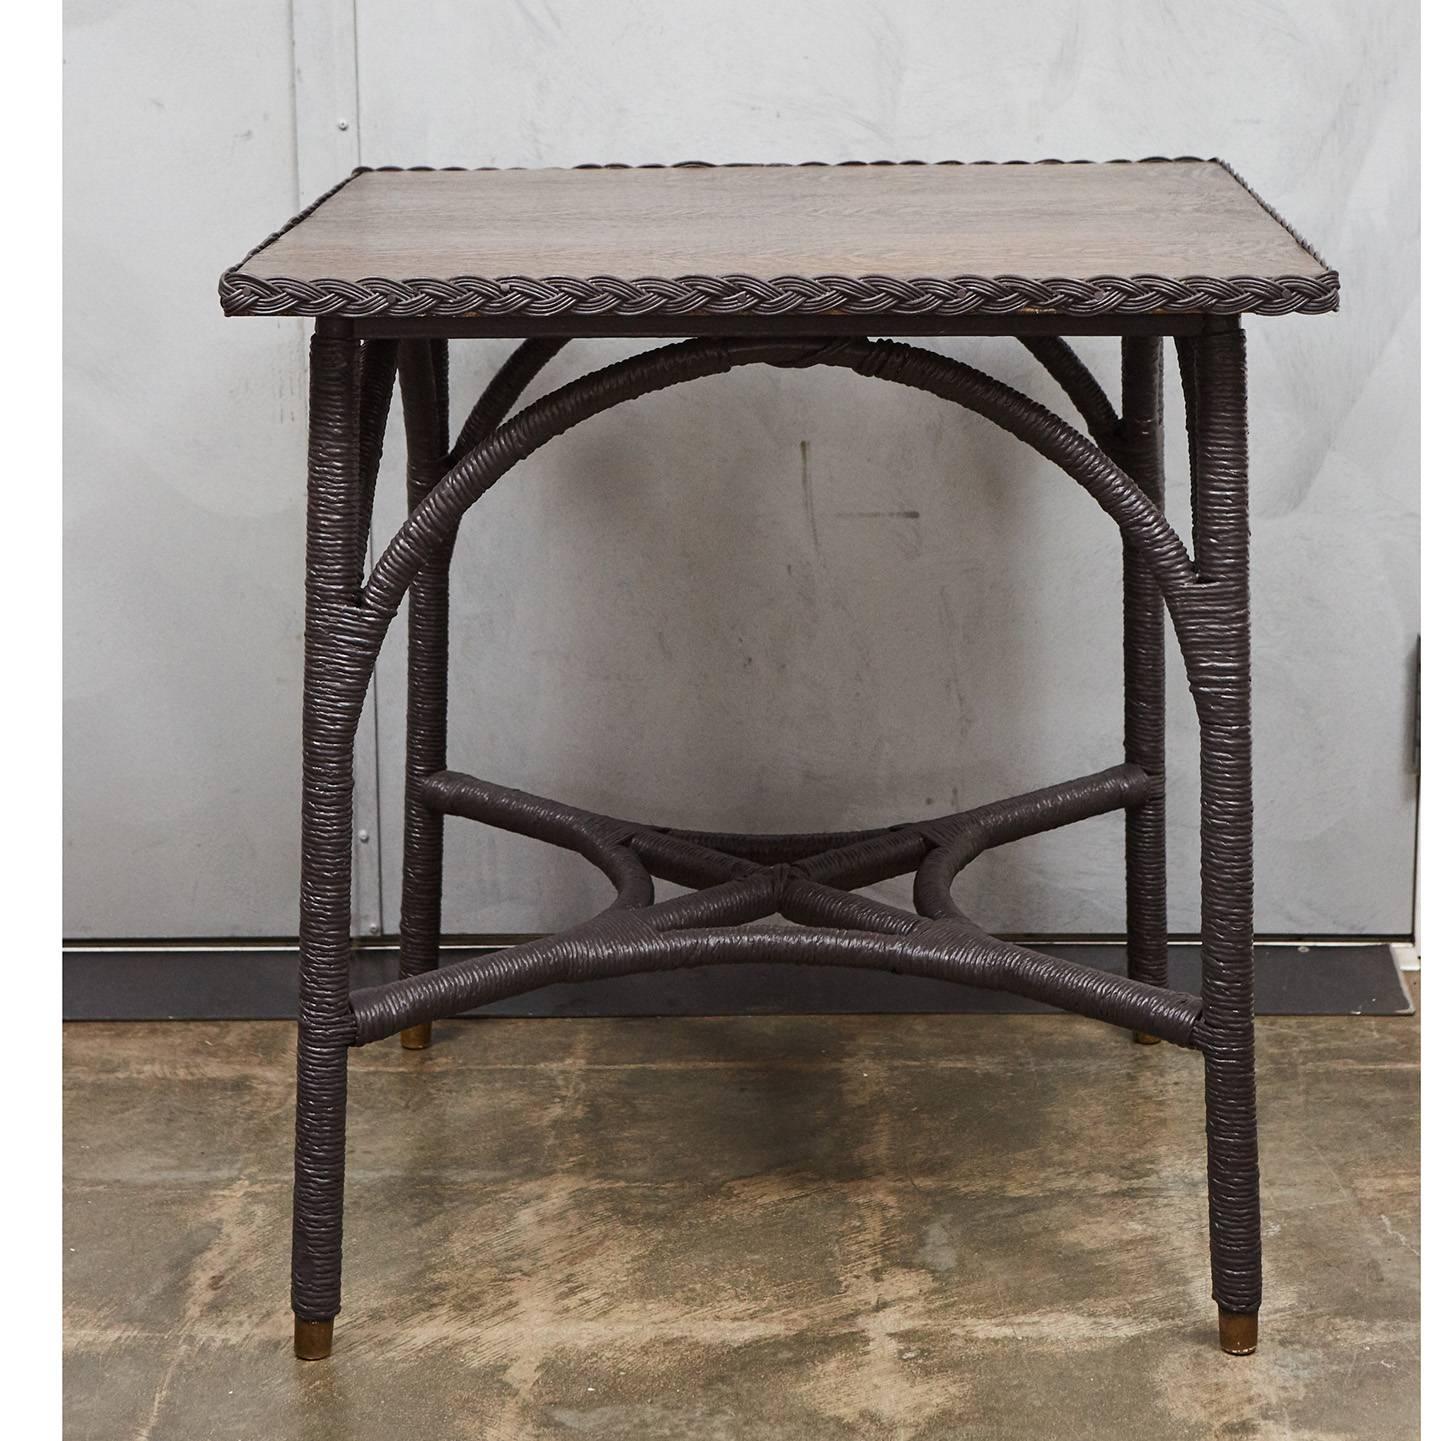 This 1930s Lloyd loom table has an oak top and bentwood construction. Lloyd loom furniture was produced in the early part of the 20th century using a technique of weaving twisted paper on looms. The piece has been recently painted with Farrow & Ball